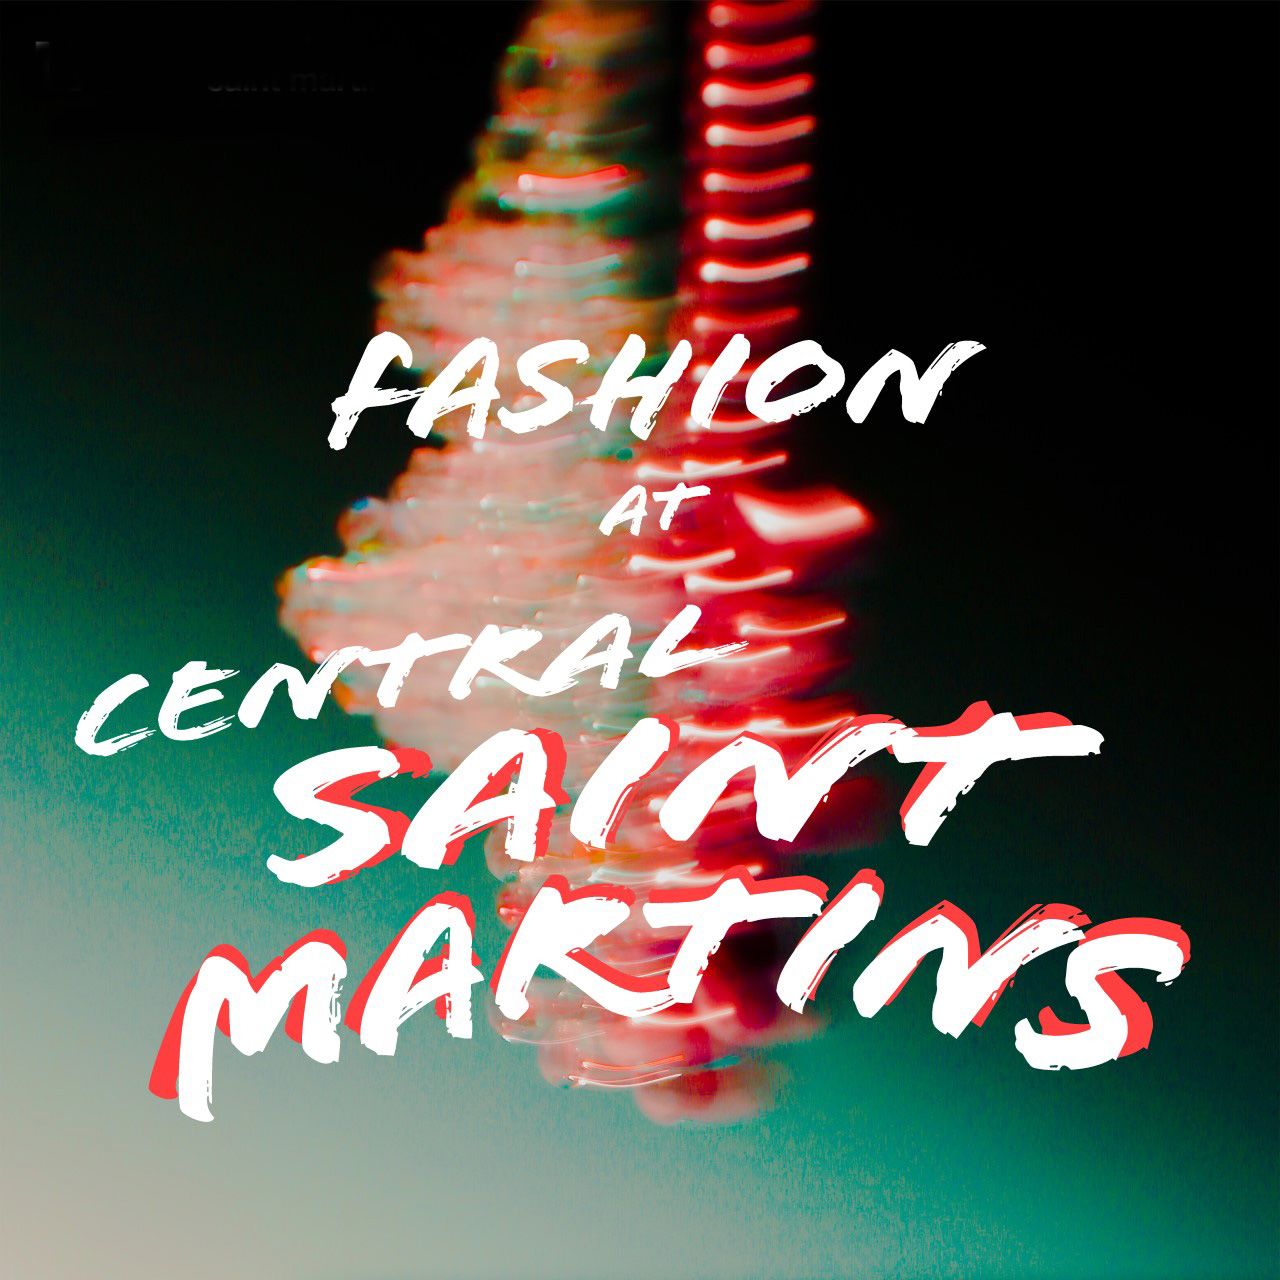 Blurred image with ttext overlay reading 'Fashion at Central Saint Martins'